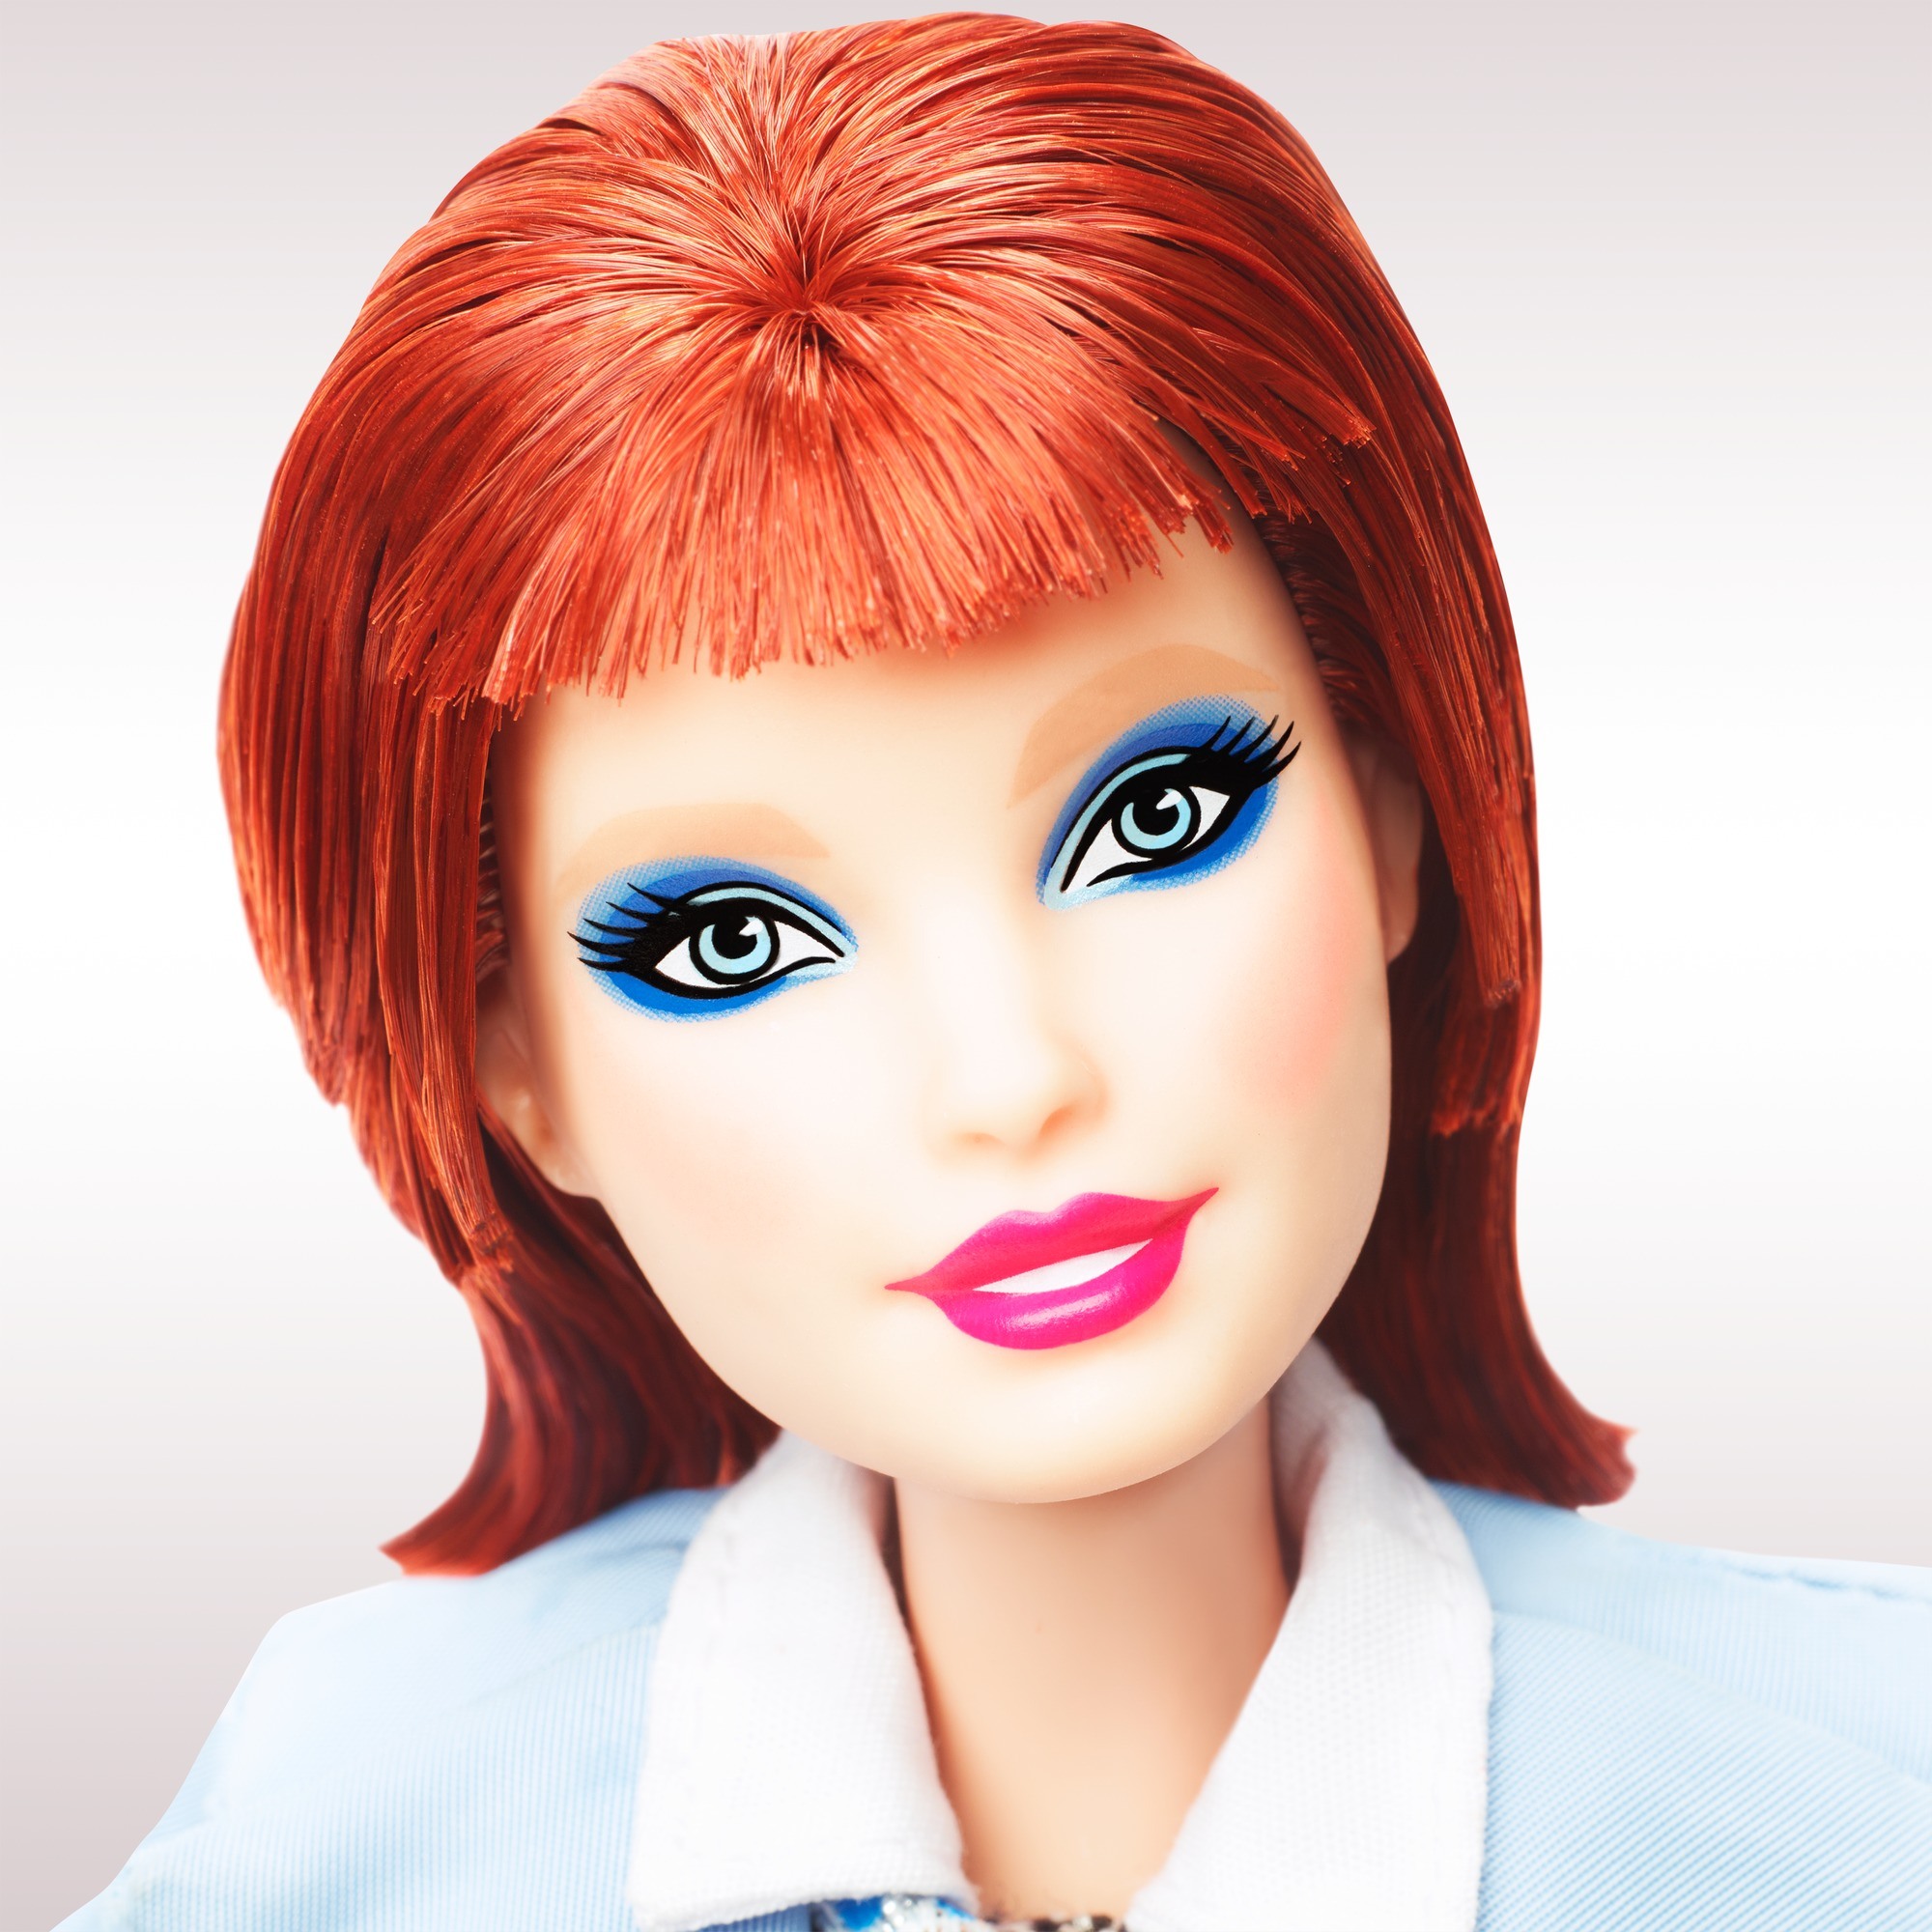 Barbie Signature David Bowie Barbie Doll, Posable, Gift for Collectors - image 4 of 7